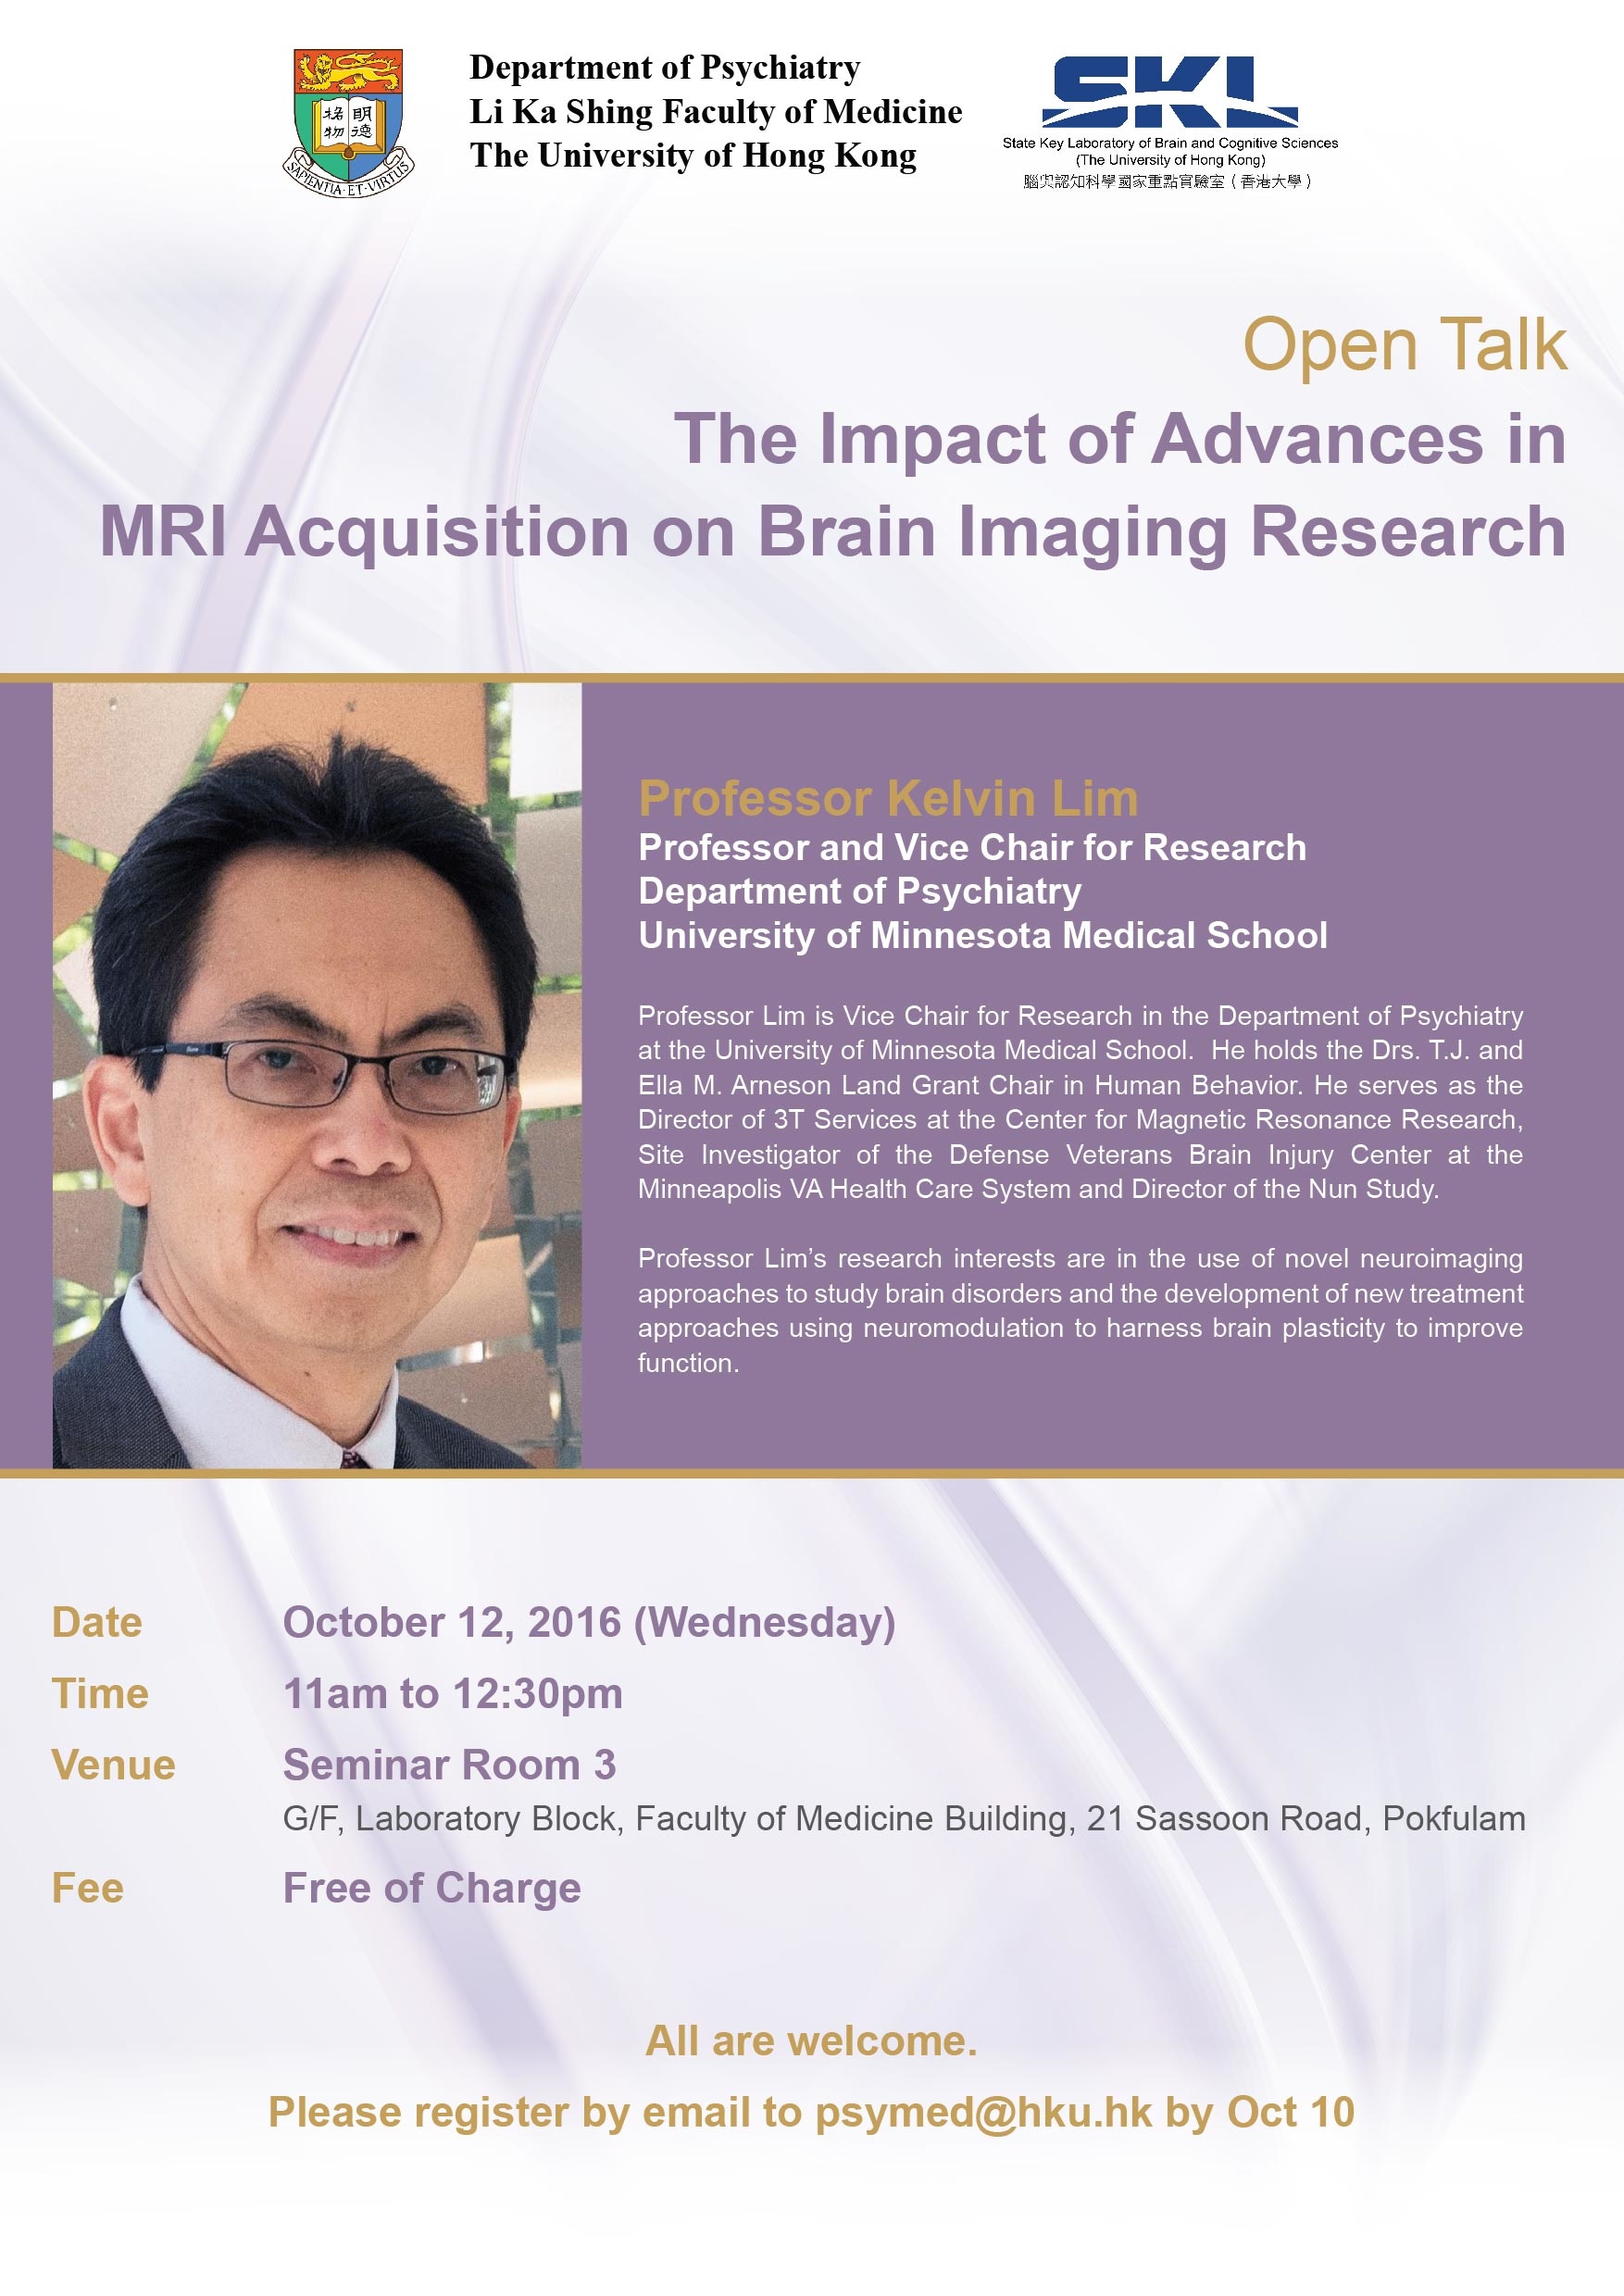 The Impact of Advances in MRI Acquisition on Brain Imaging Research